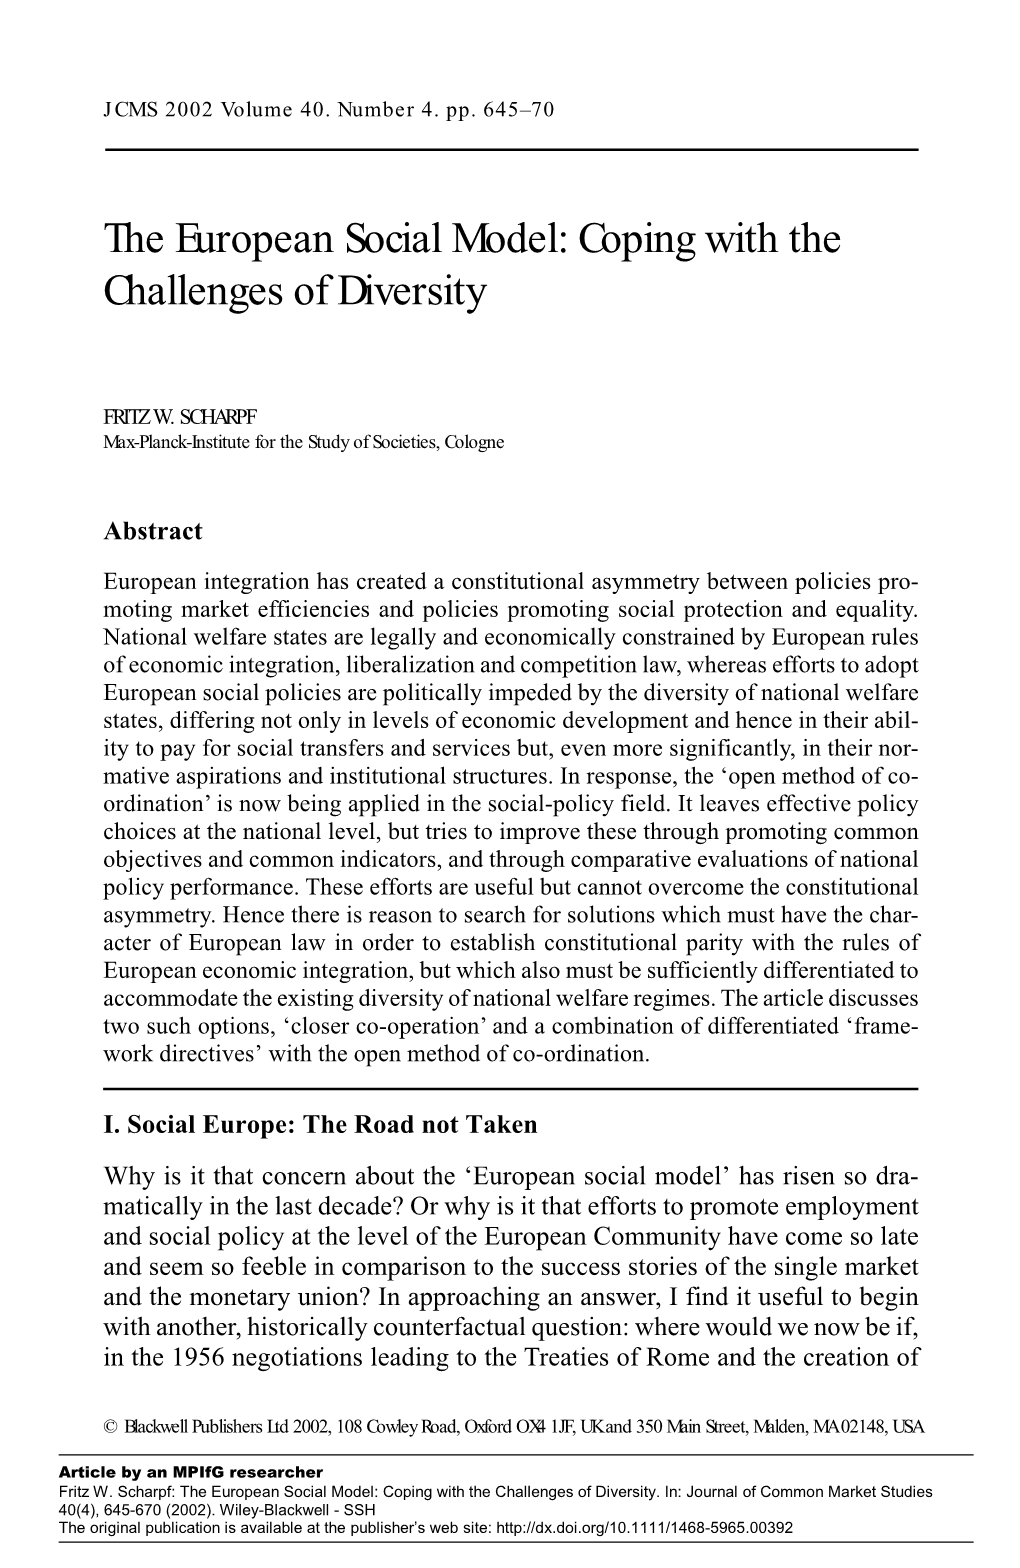 The European Social Model: Coping with the Challenges of Diversity